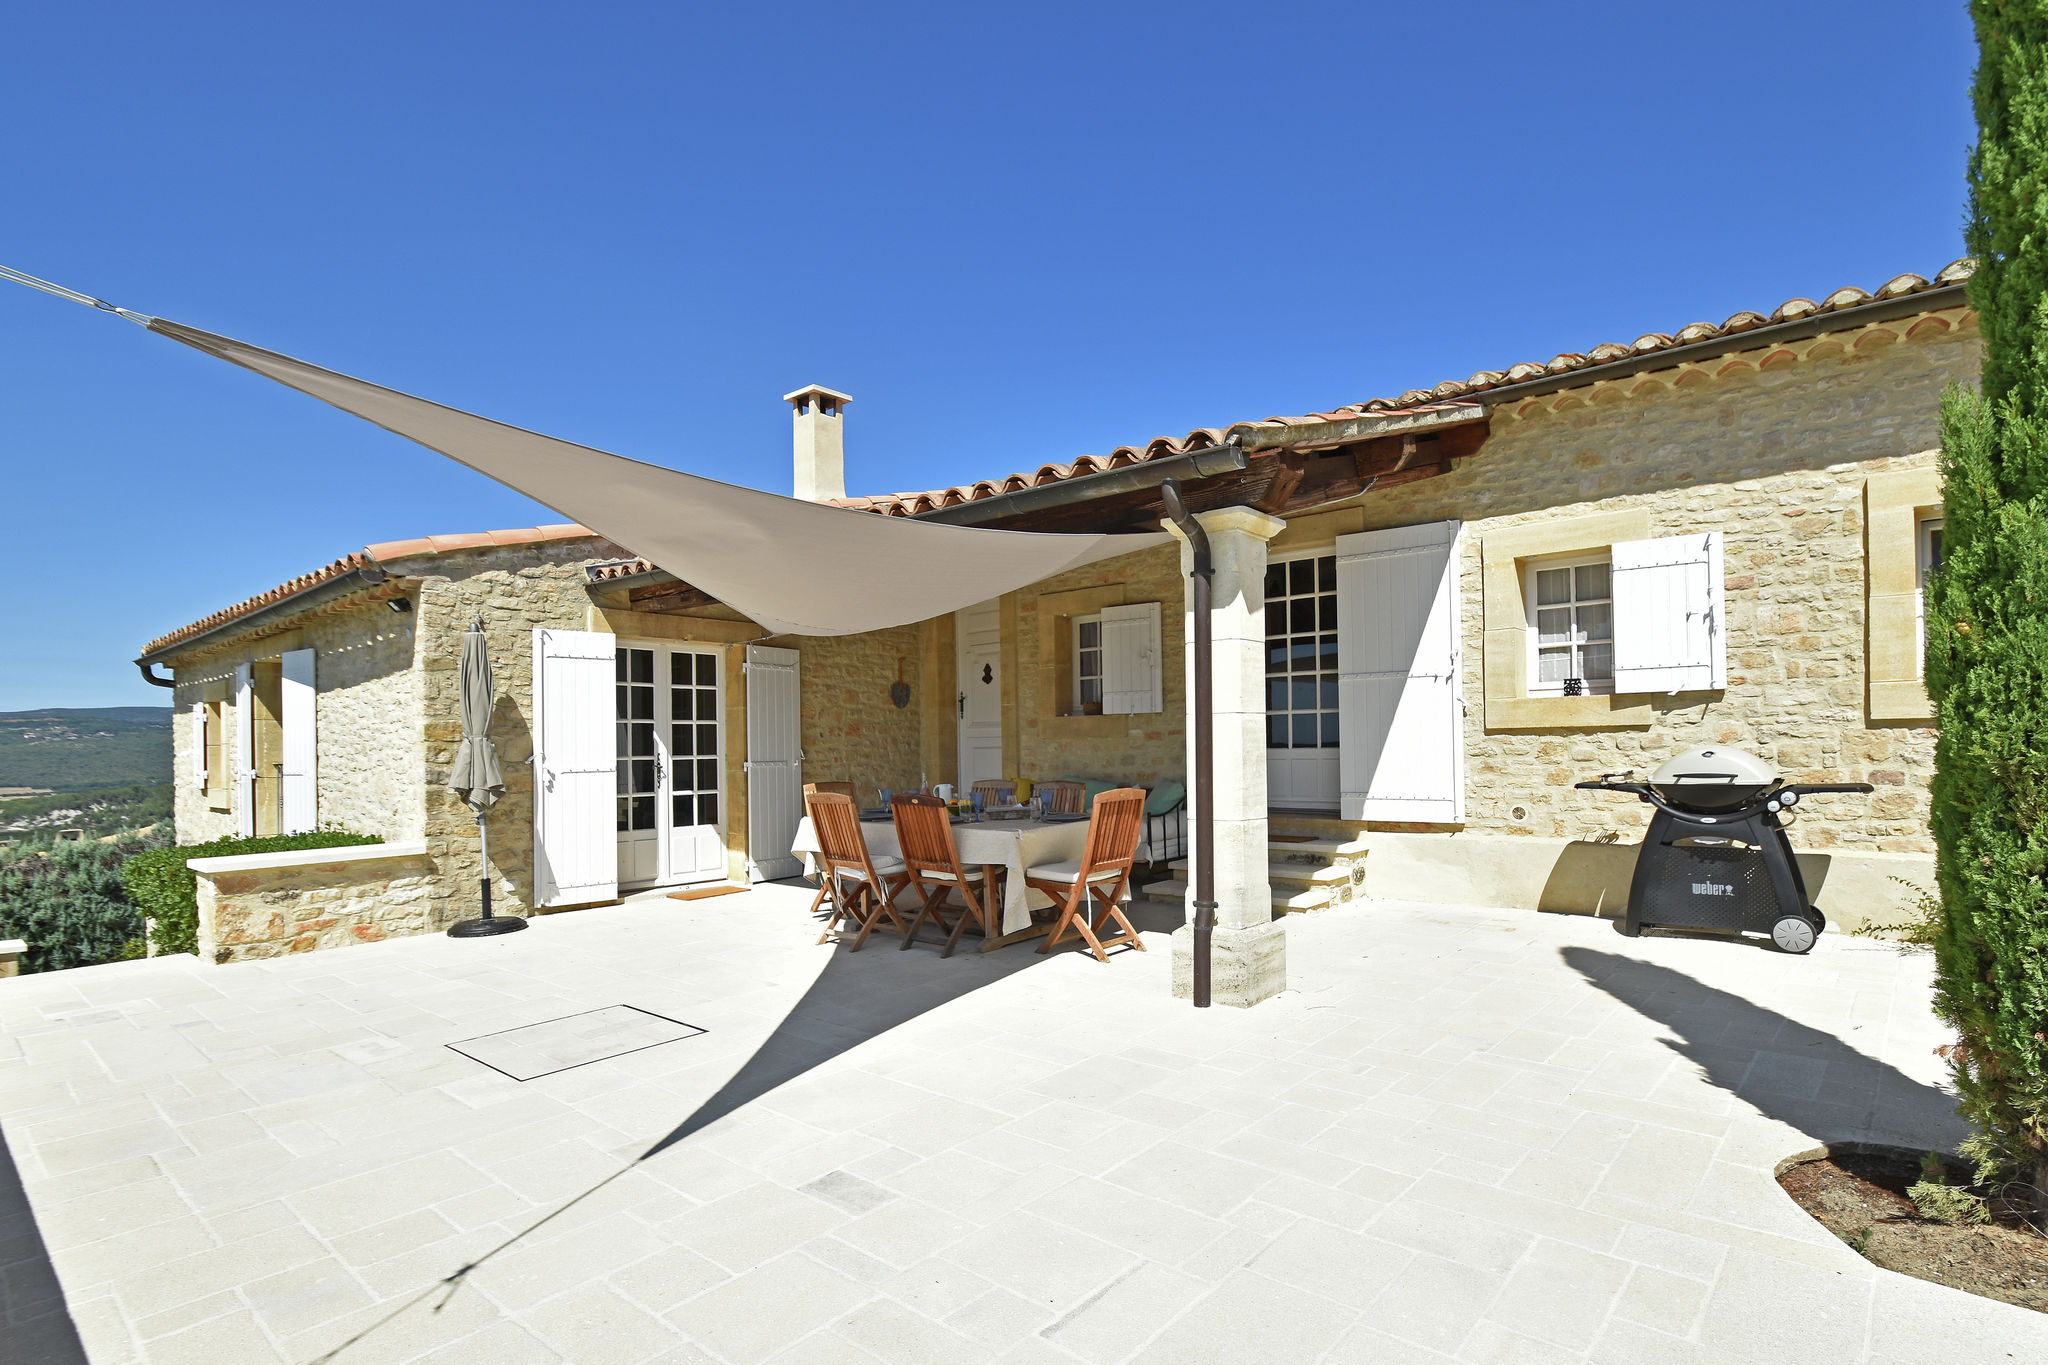 Villa with private pool and views of the Luberon